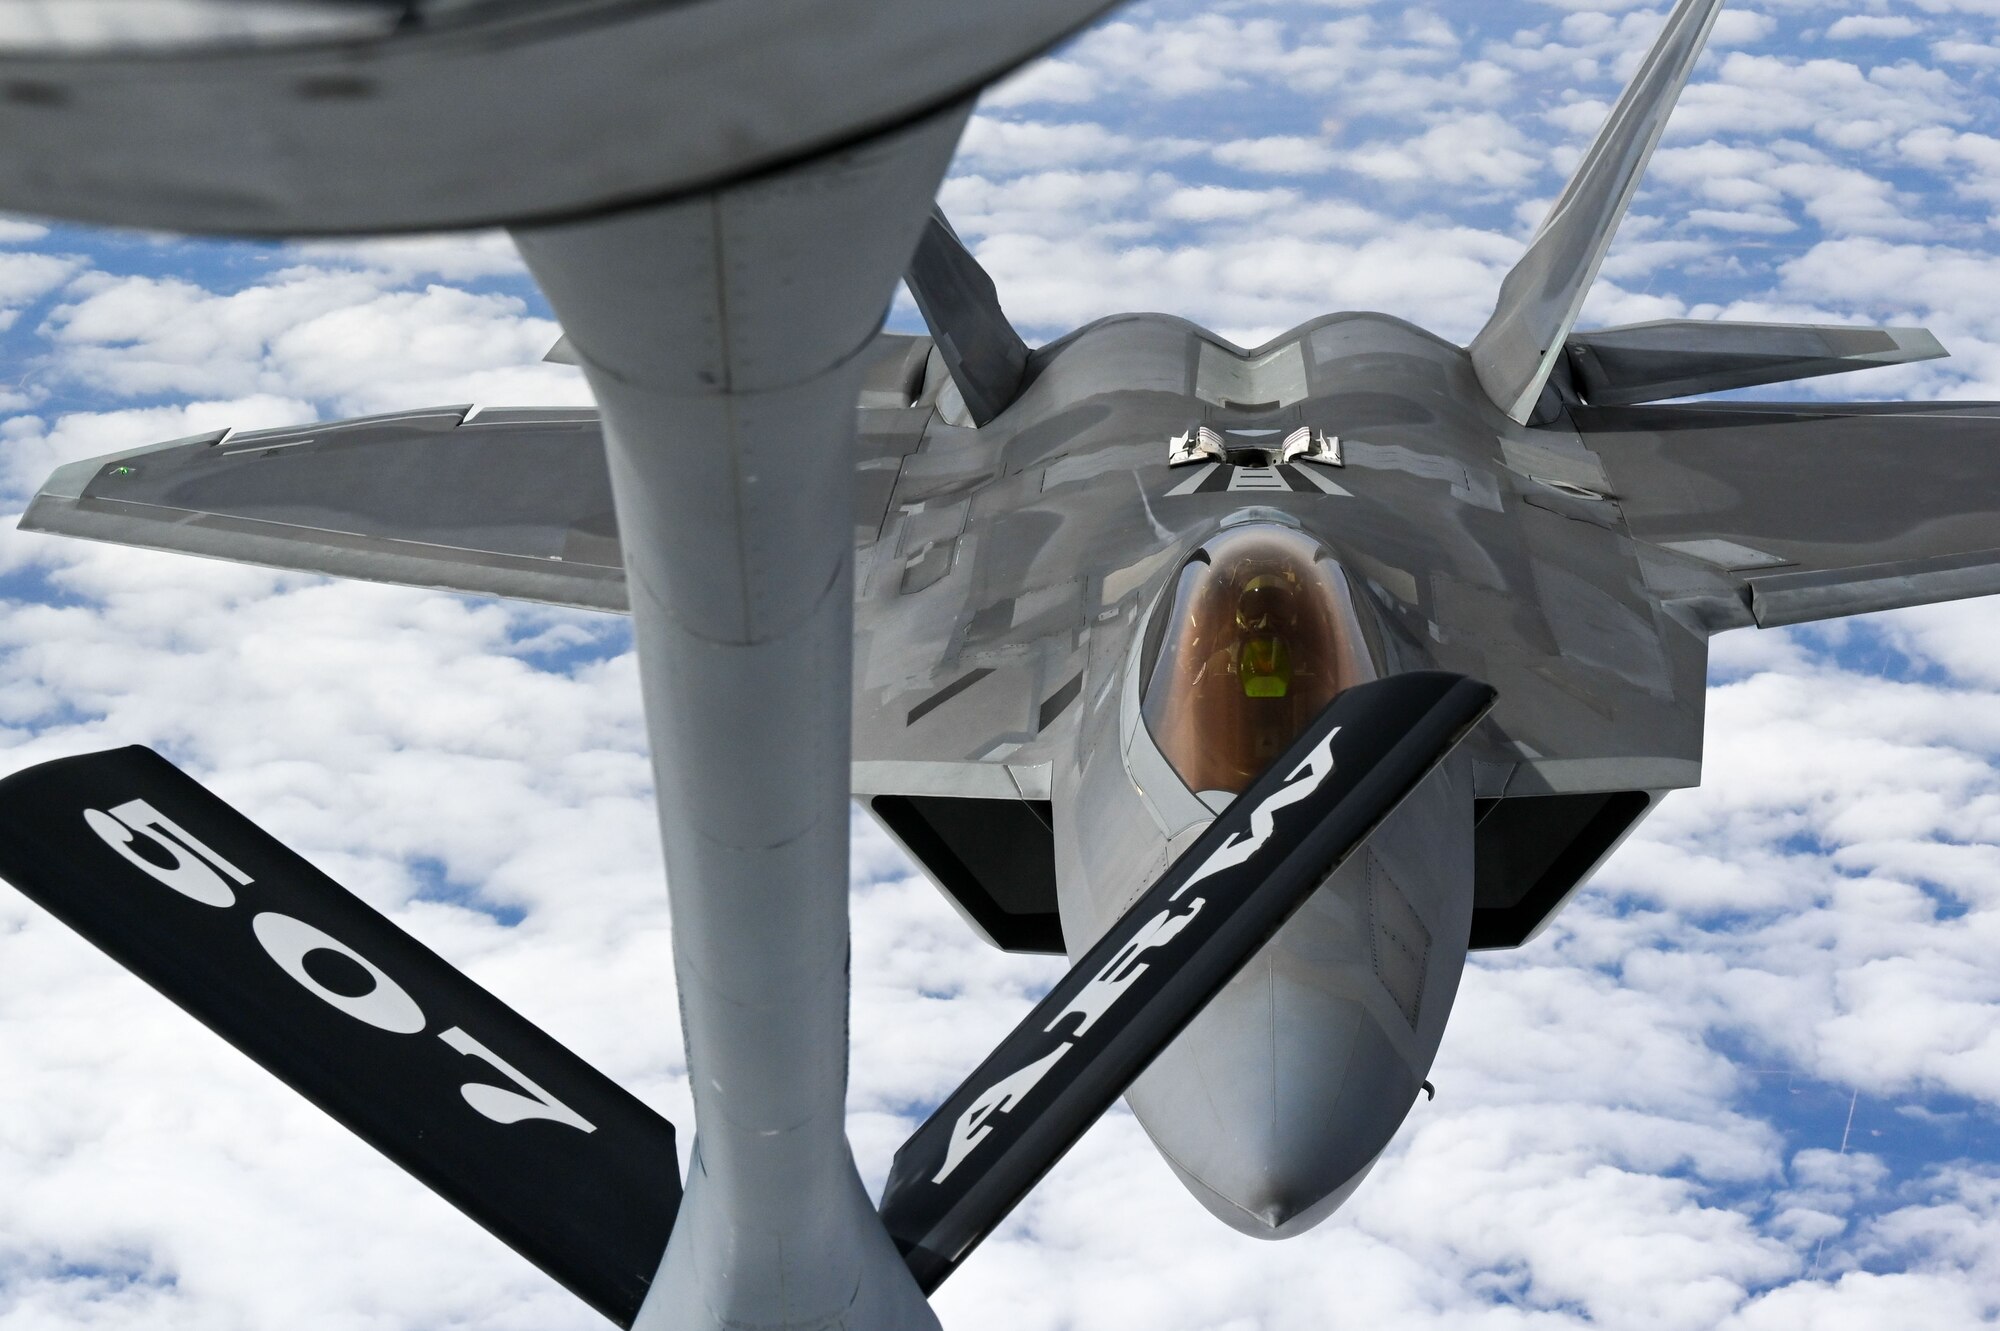 An F-22 Raptor Demonstration Team pilot refuels with a KC-135 Stratotanker from the 465th Air Refueling Squadron assigned to Tinker Air Force Base, Oklahoma, March 8, 2021. The F-22 team from Joint Base Langley–Eustis, Virginia, is assigned to Air Combat Command and received fuel from the Okies during their flight back to their home station after performing at an air show. (U.S. Air Force photo by Senior Airman Mary Begy)